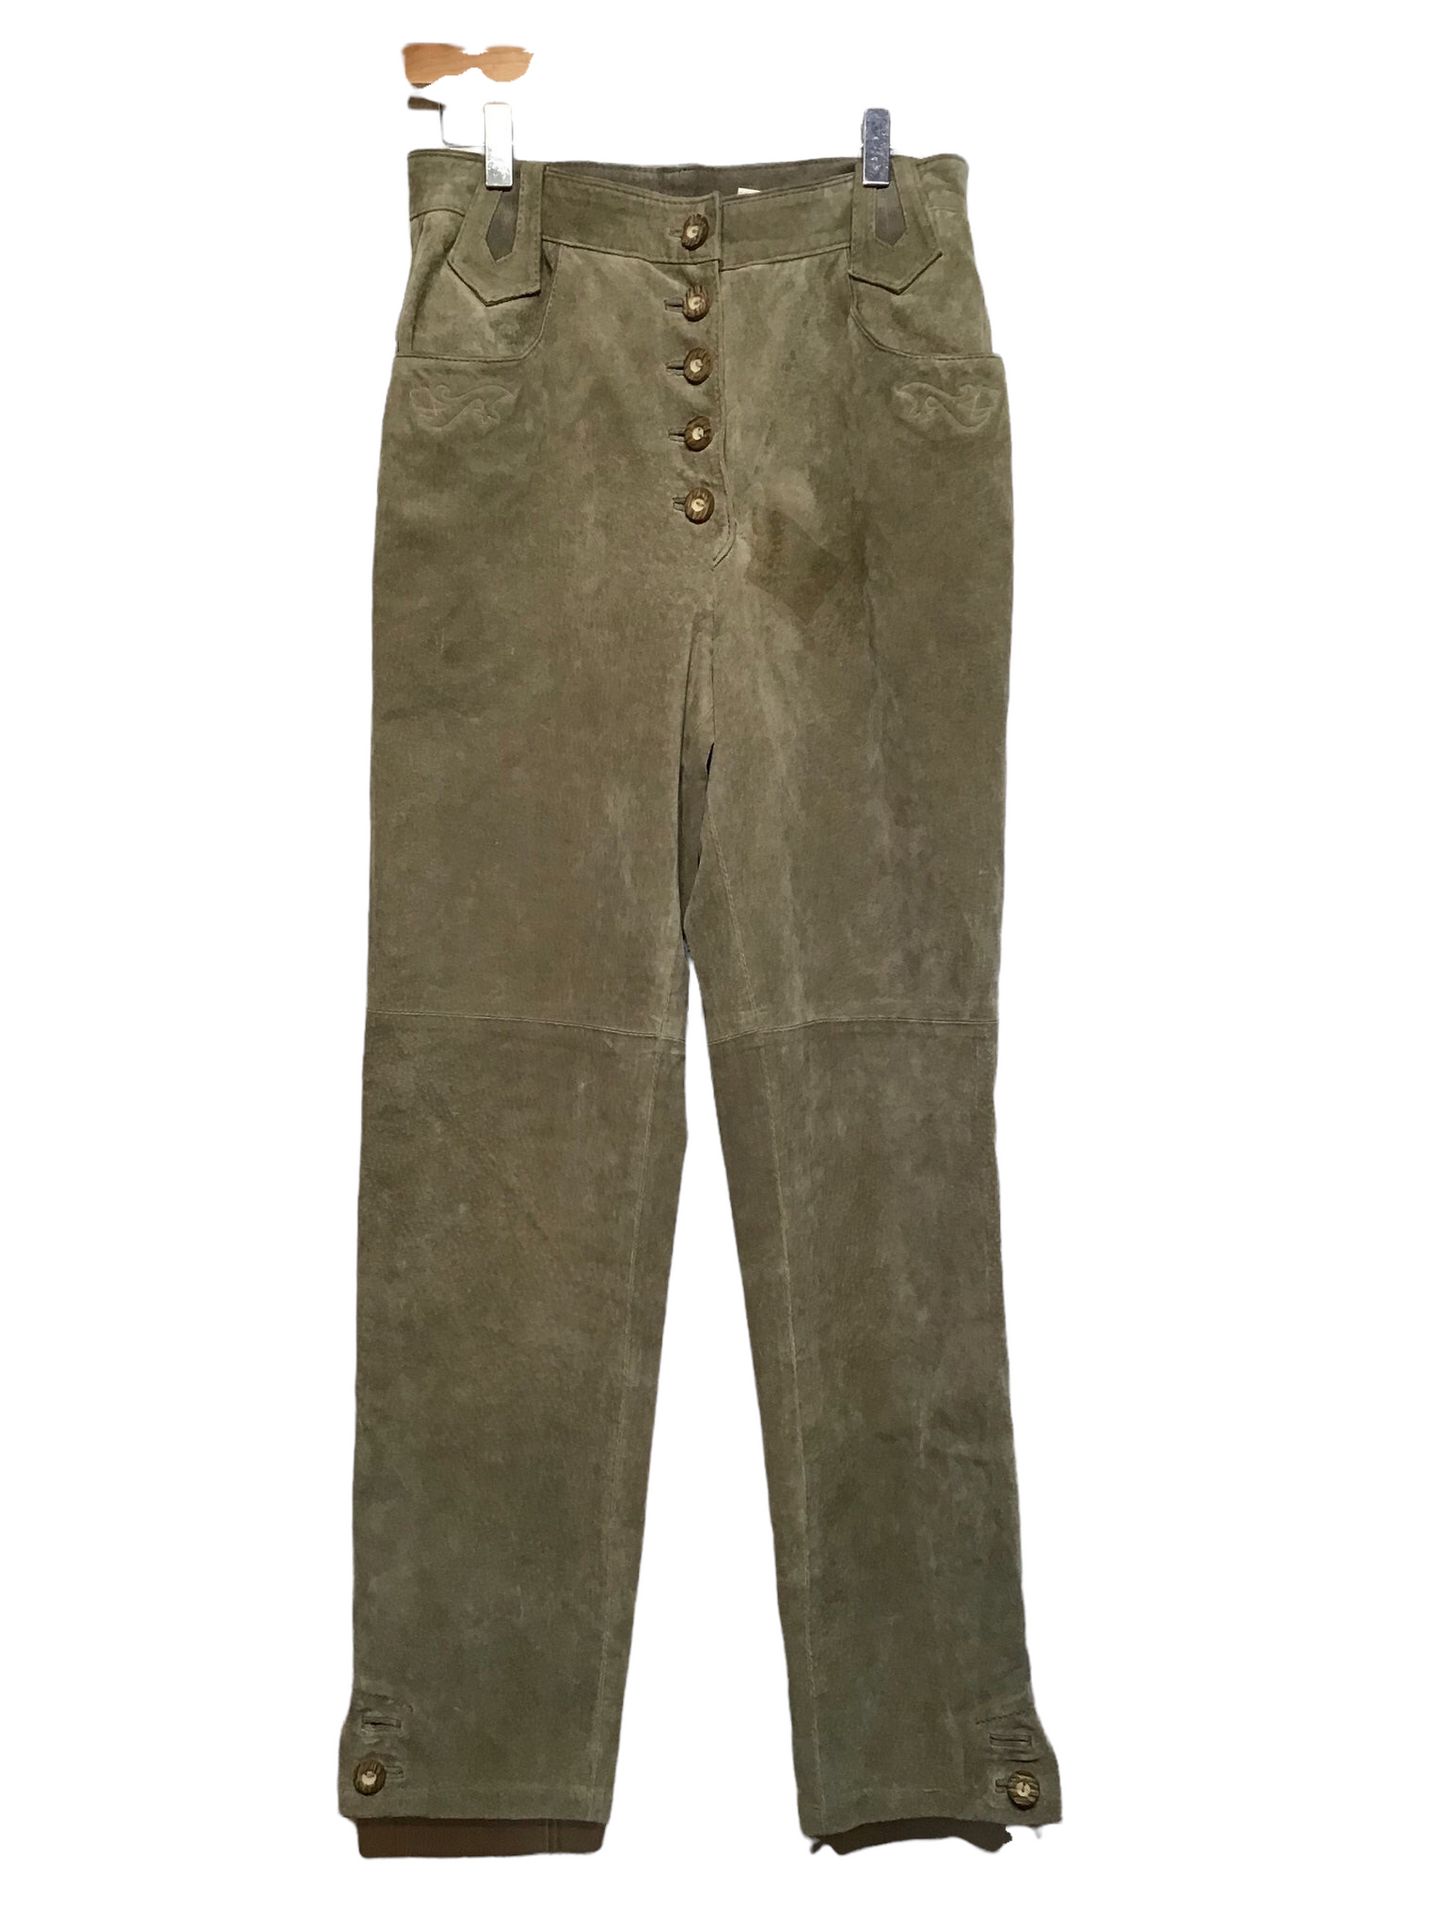 Suede Button Up Trousers (29”)